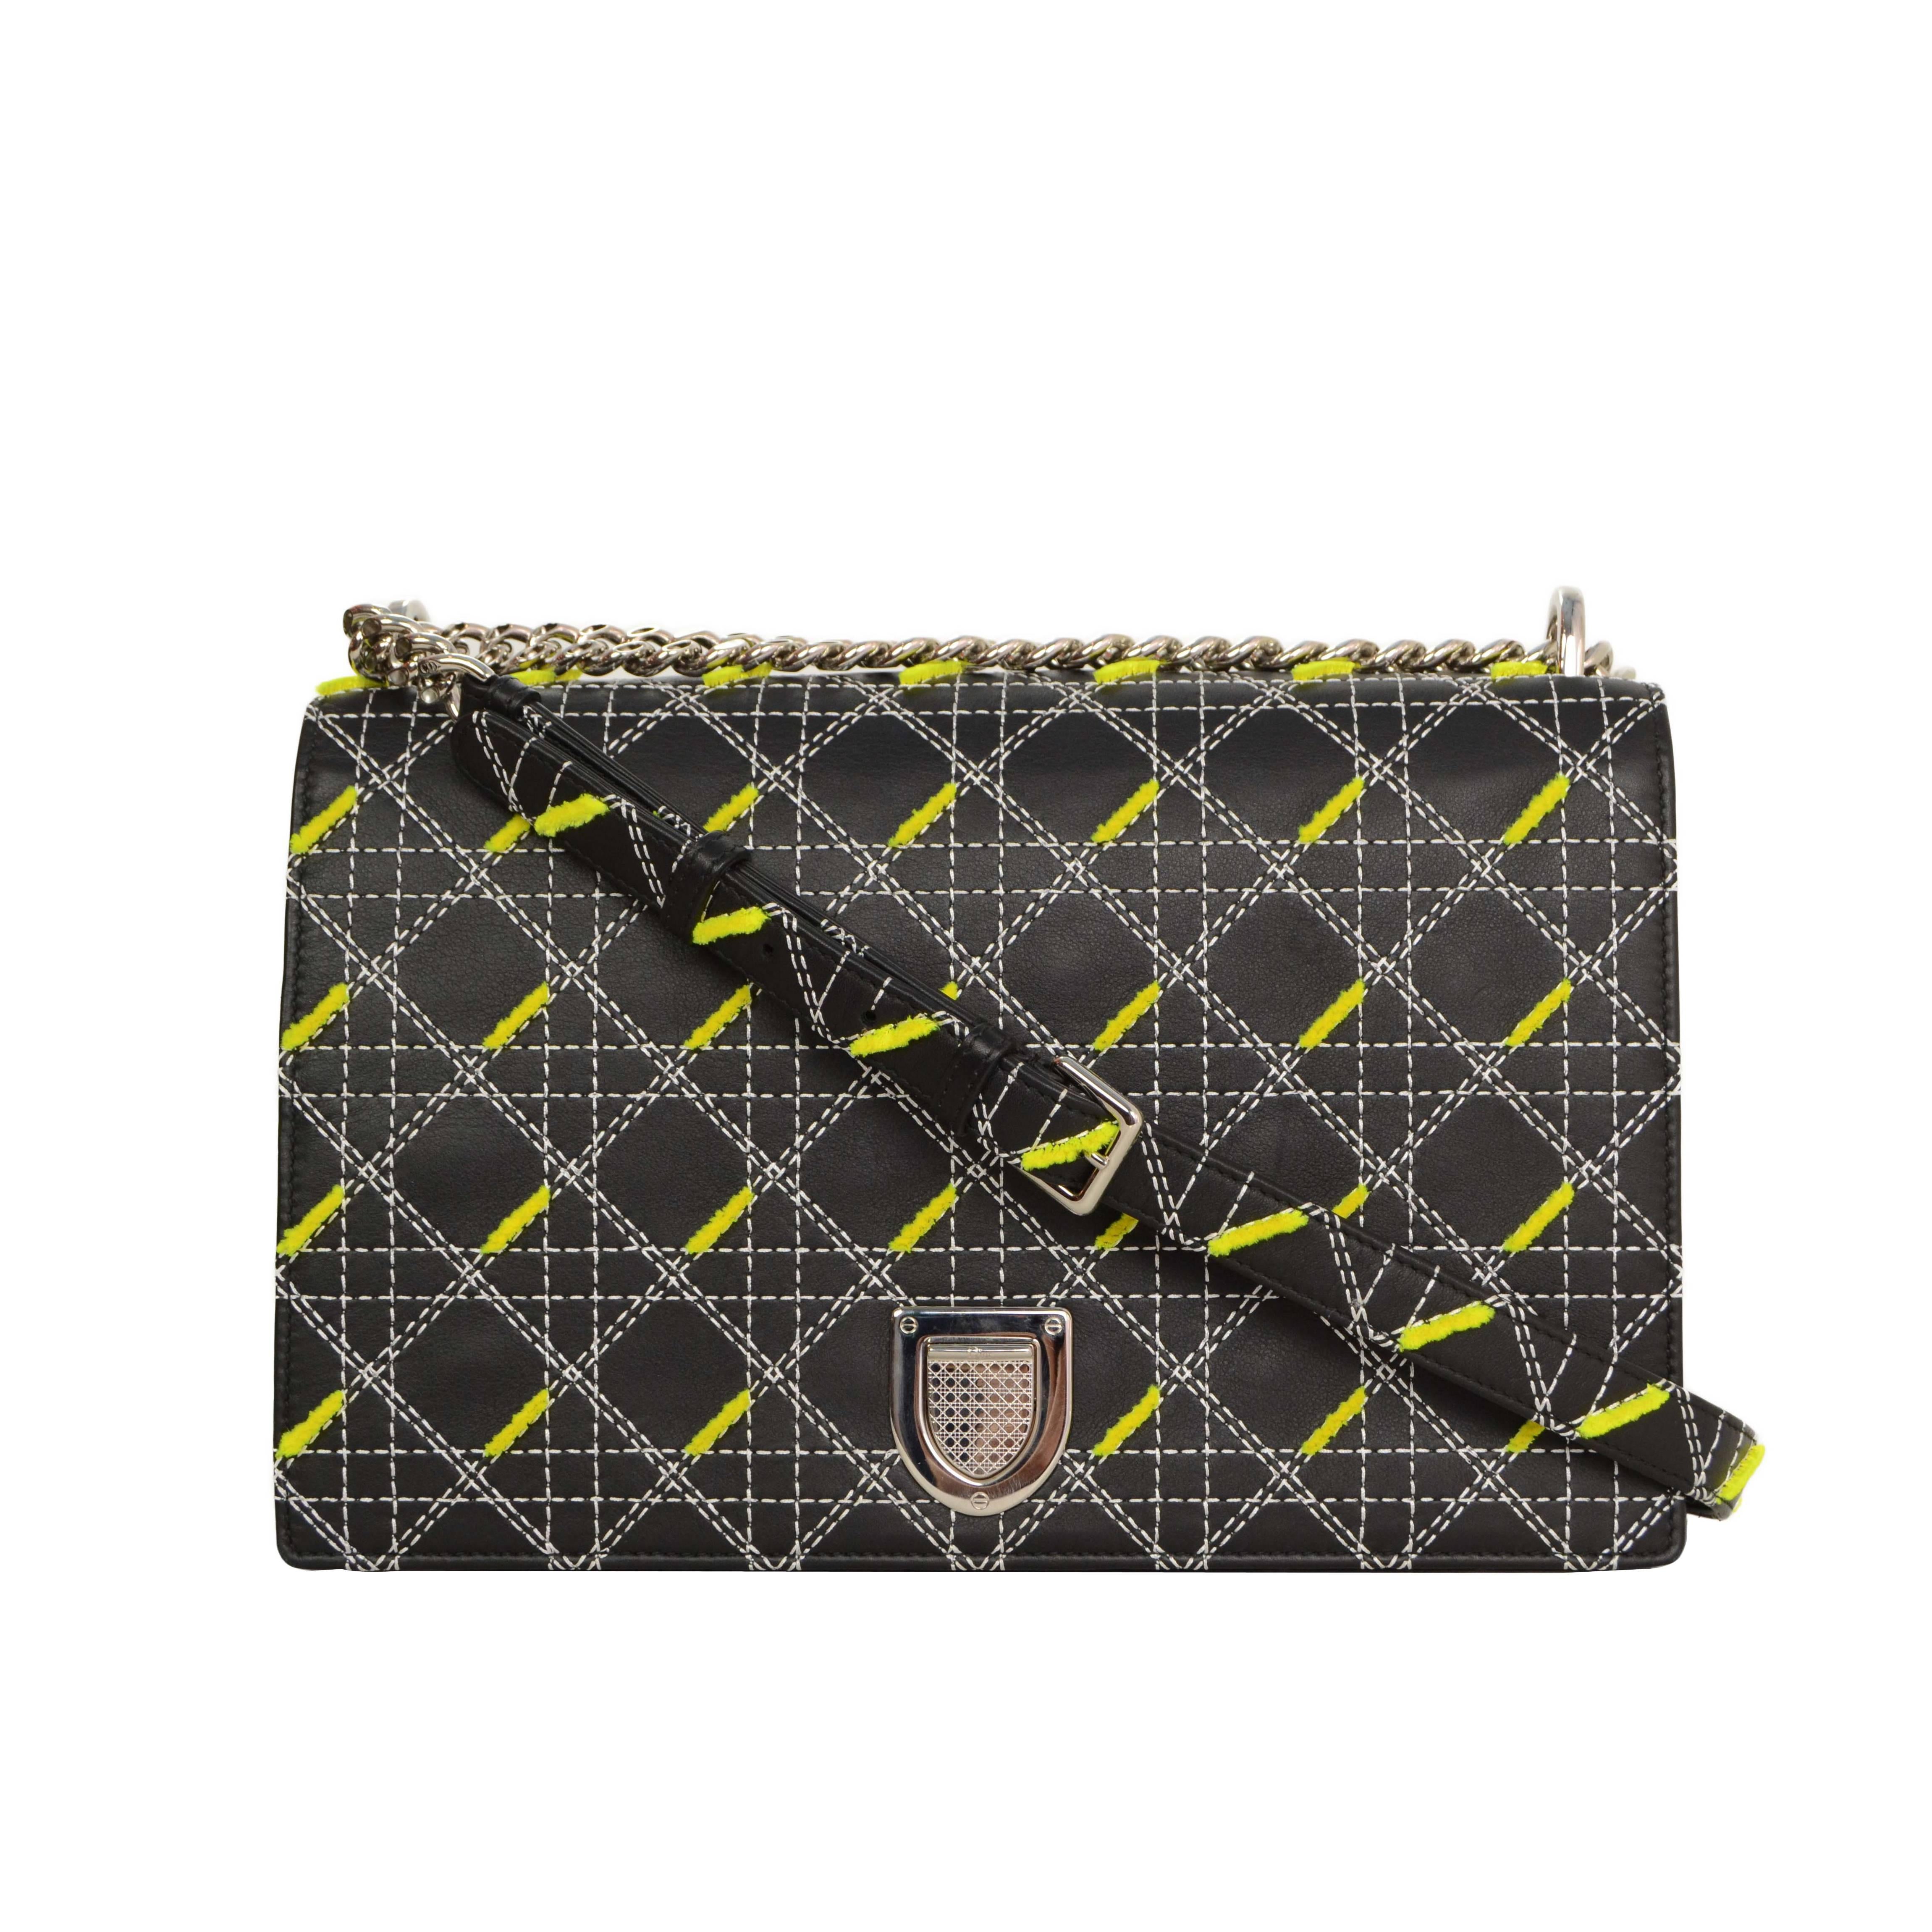 Christian Dior Black Quilted Diorama Large Flap Bag SHW rt. $6, 300